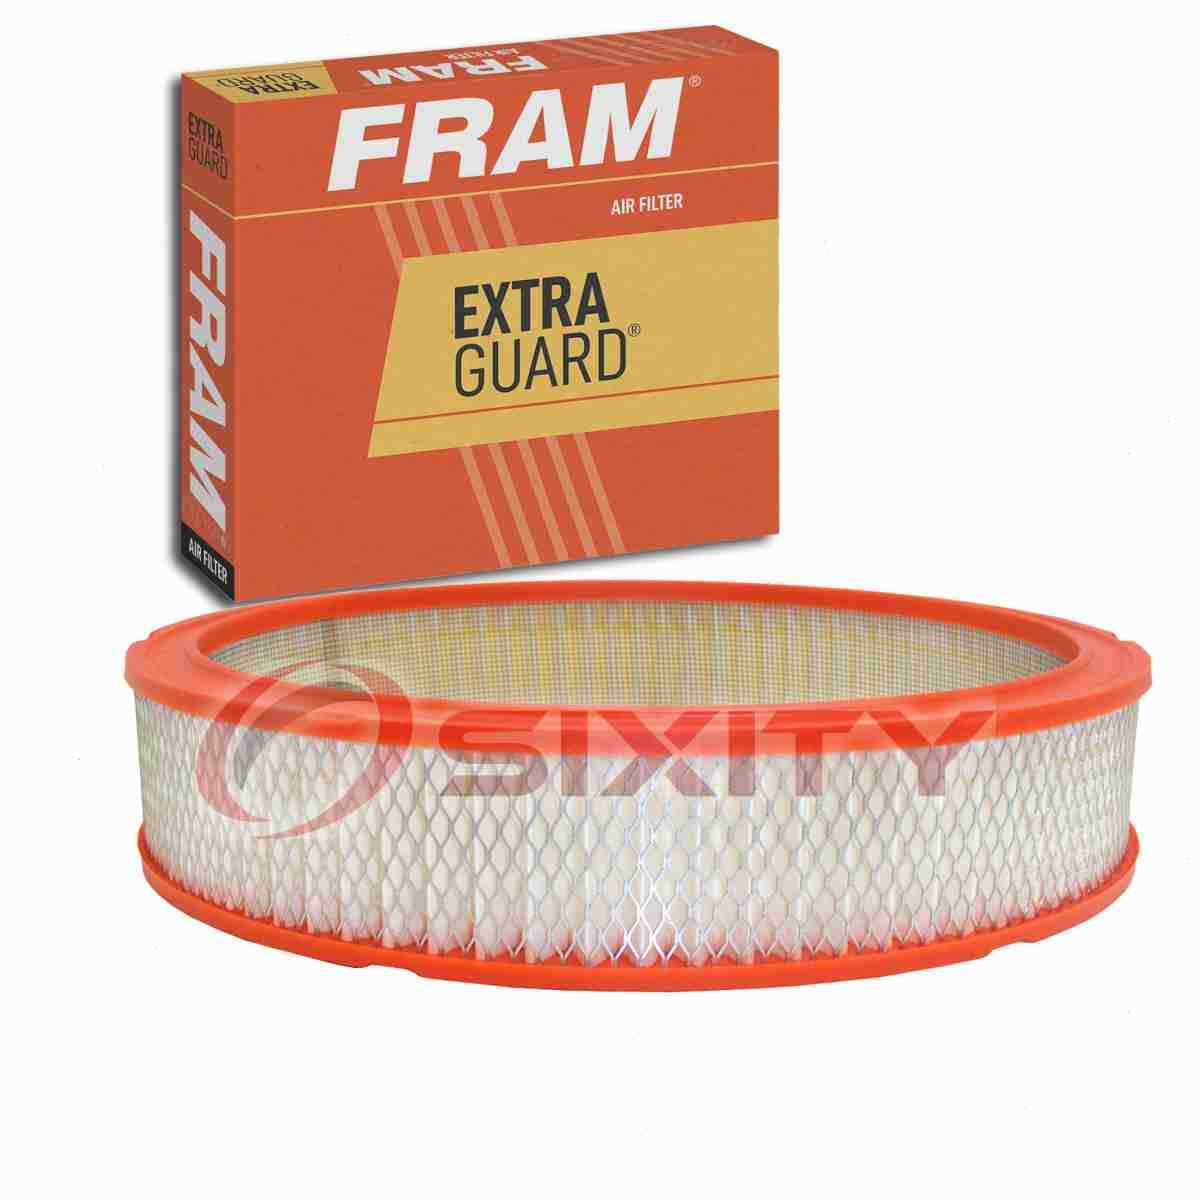 FRAM Extra Guard Air Filter for 1968-1979 Ford F-100 Intake Inlet Manifold fv